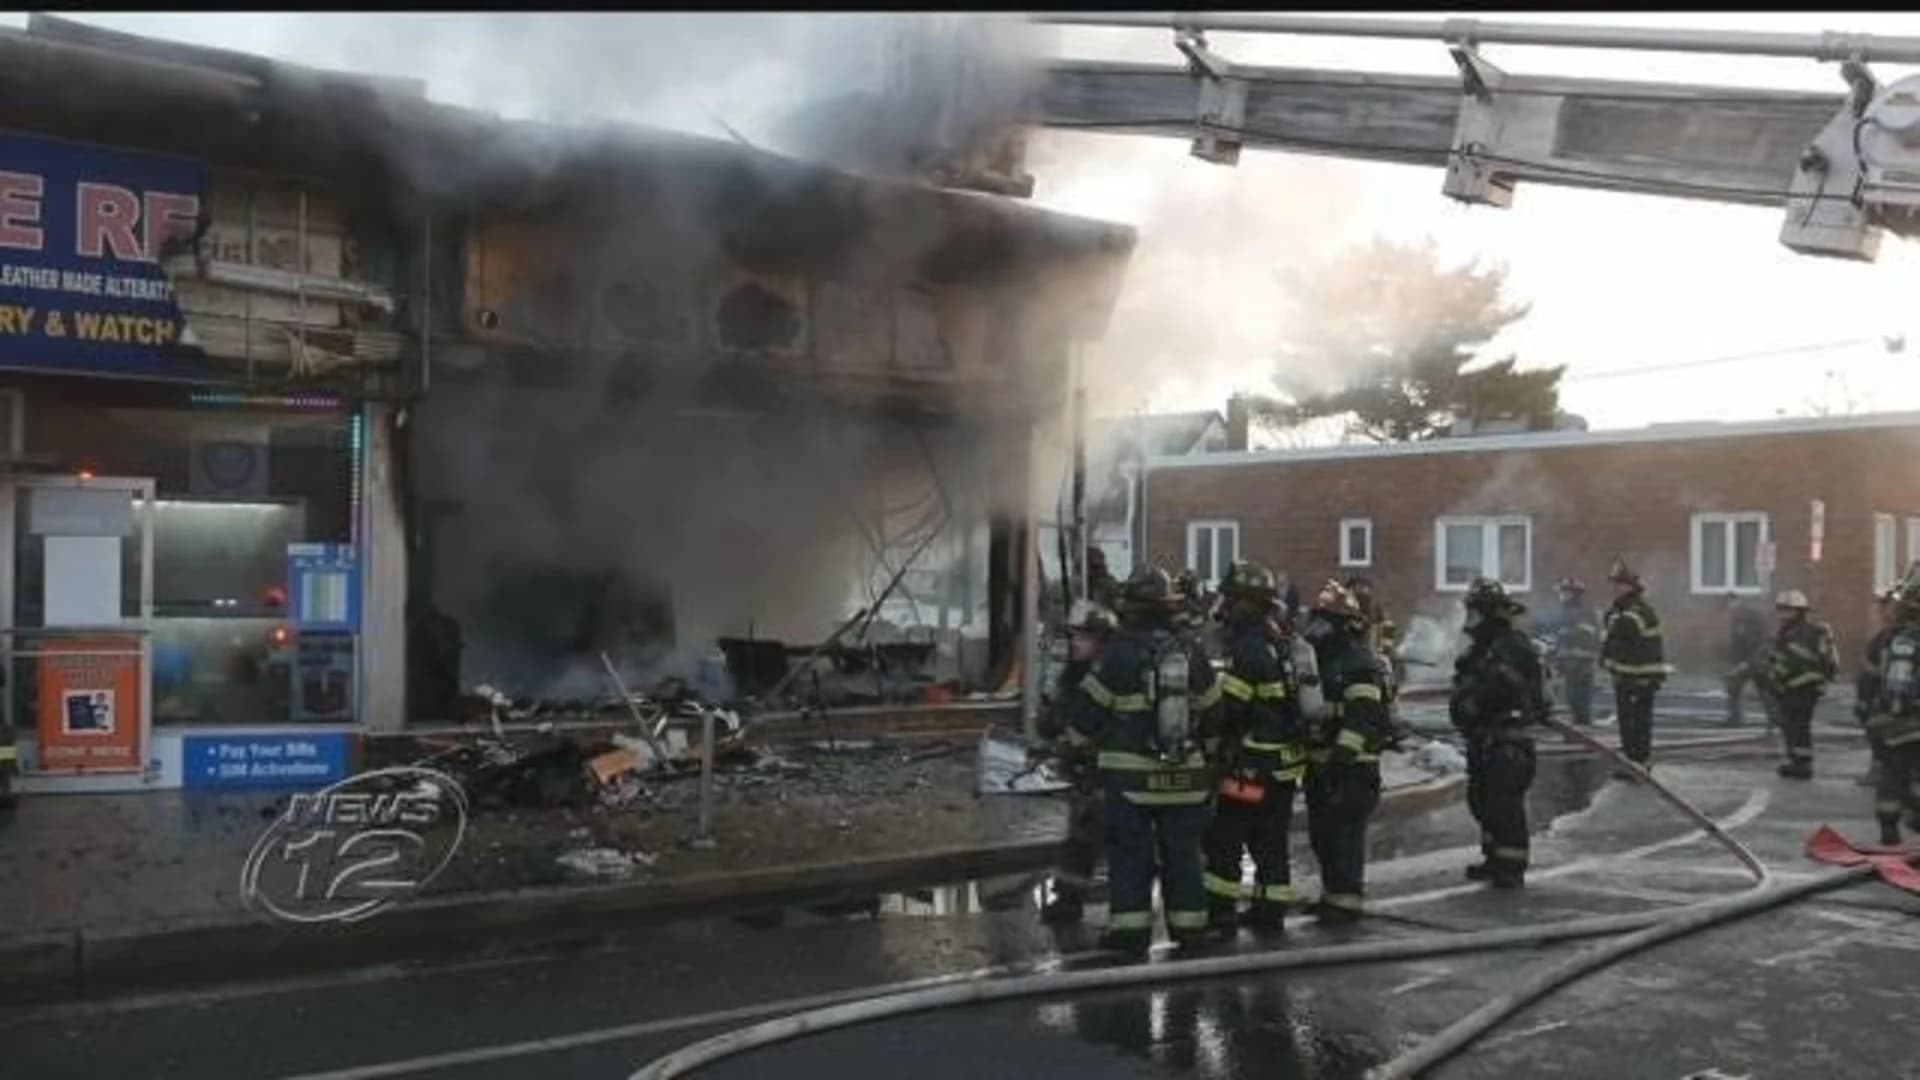 Officials: 7 treated for smoke inhalation in Valley Stream deli fire